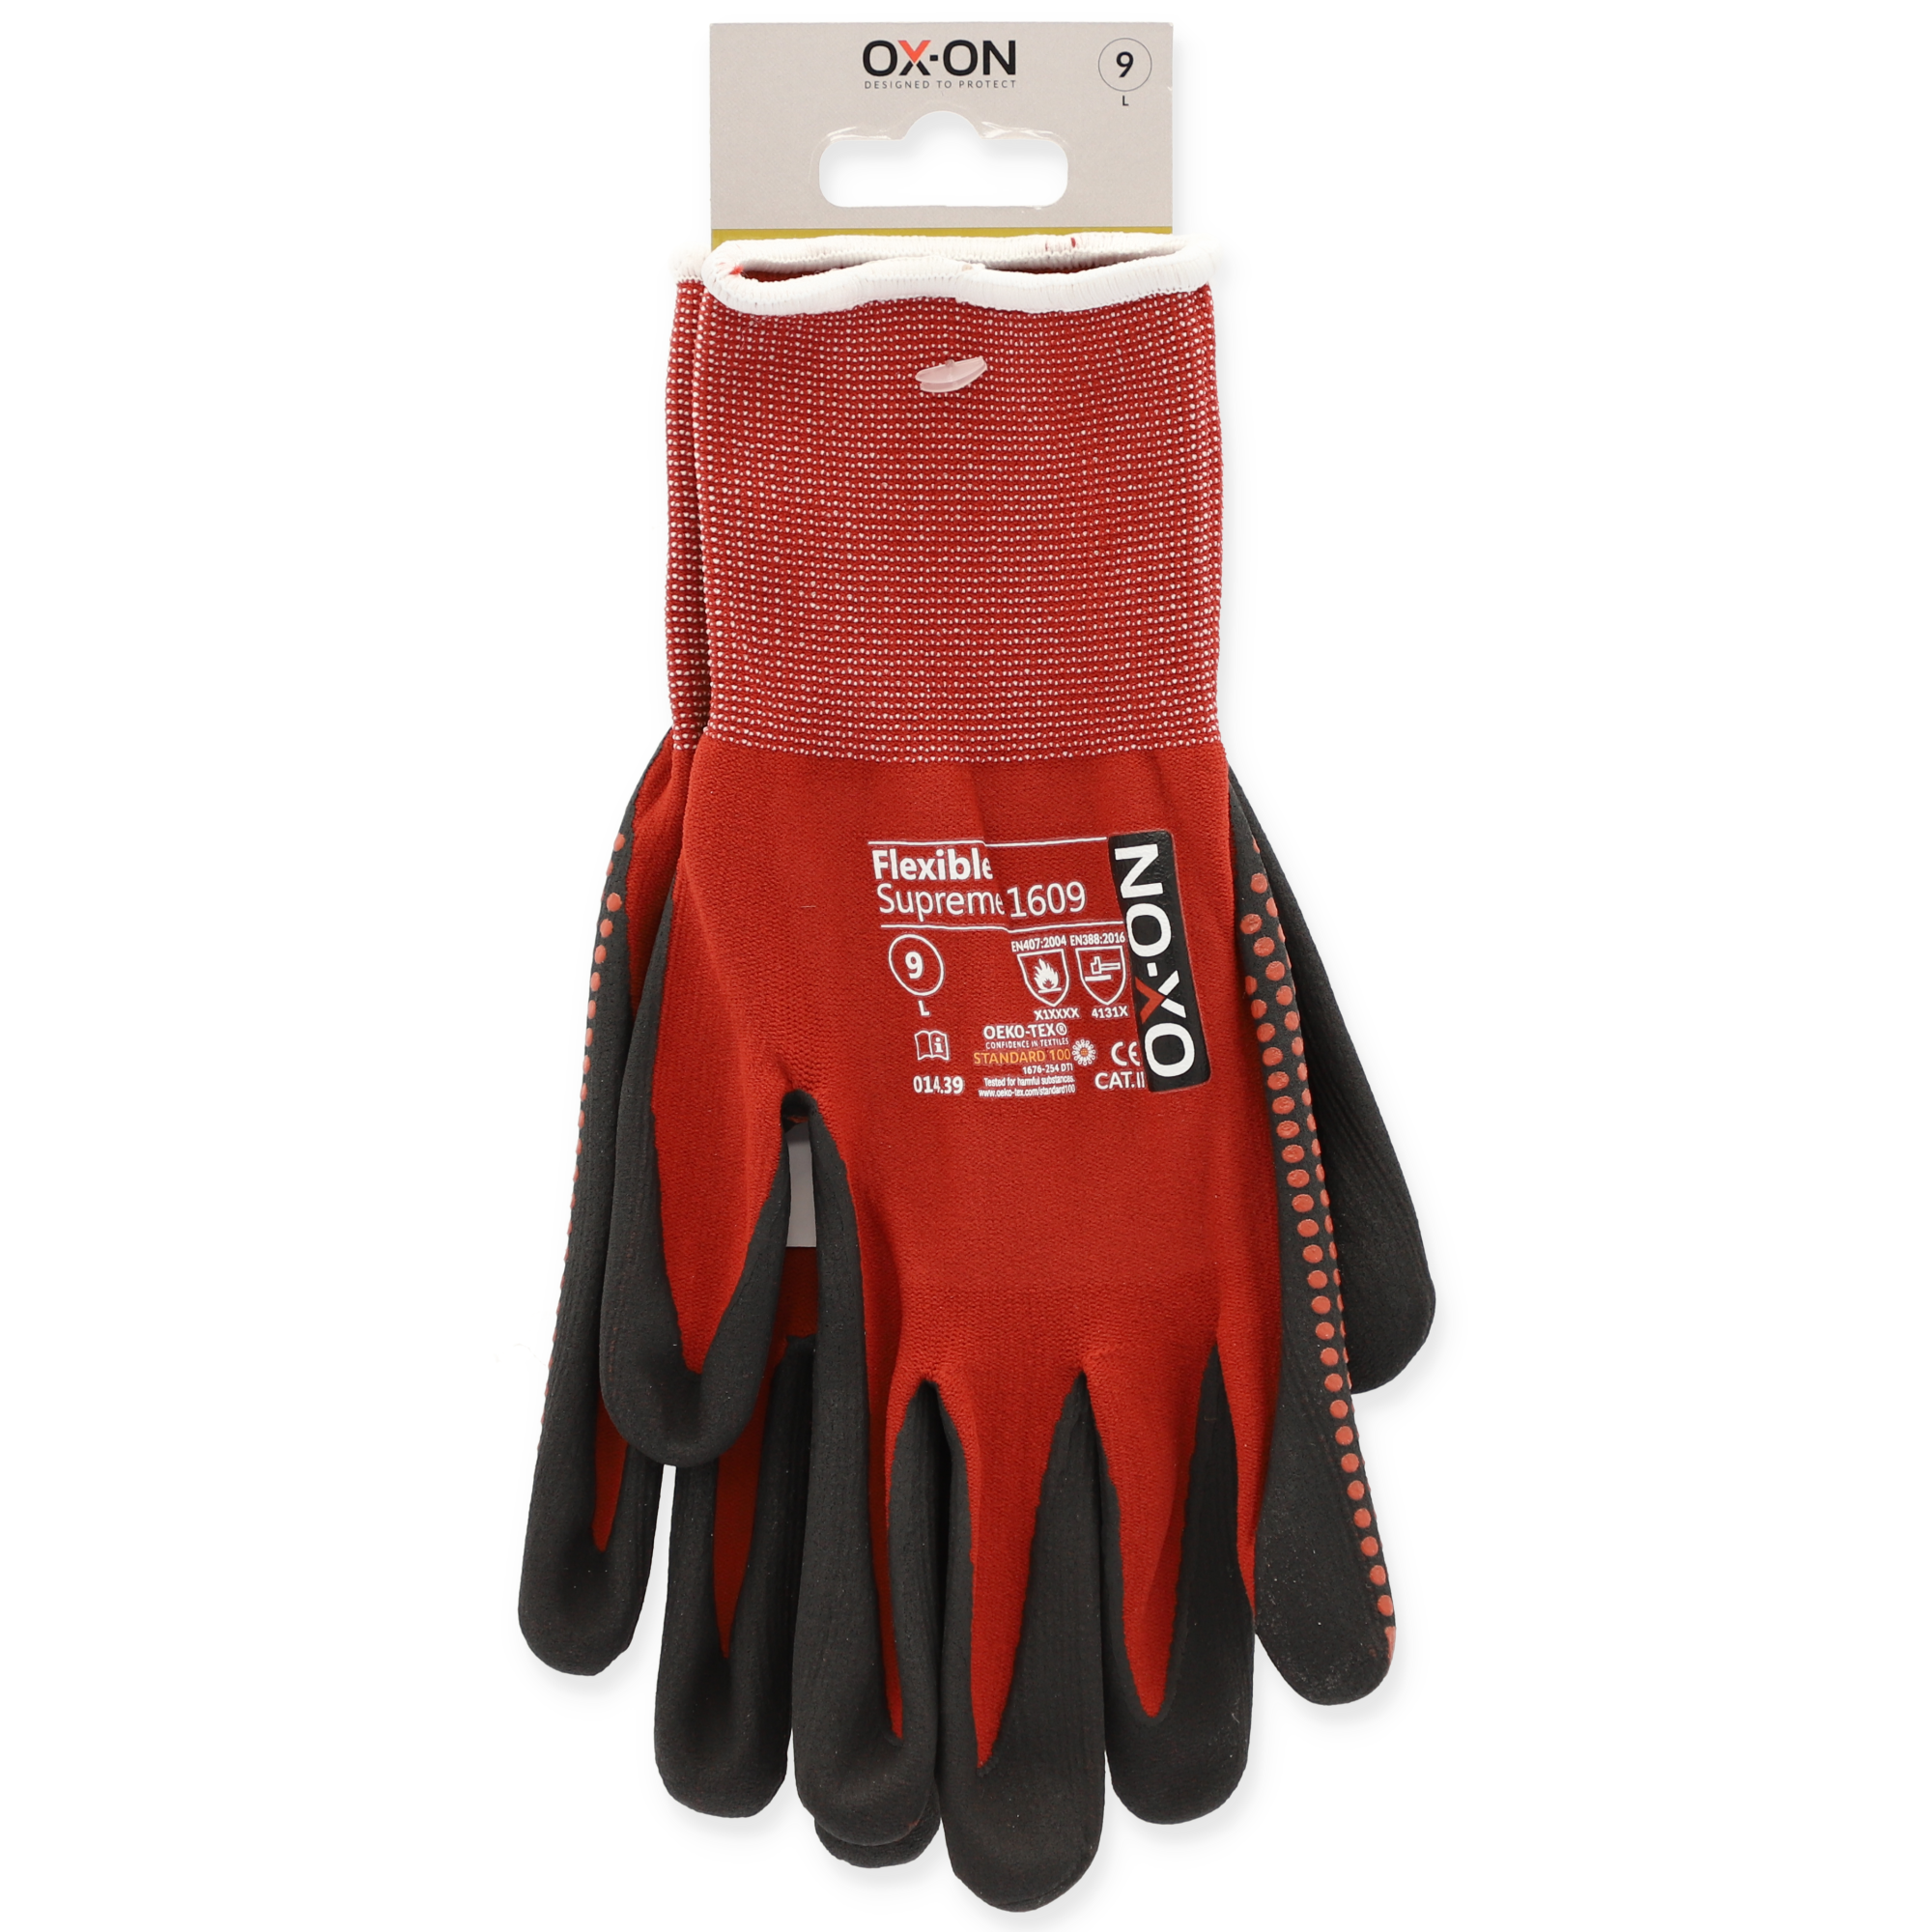 Handschuhe 'Flexible Supreme 1609' rot Gr. 8 + product picture